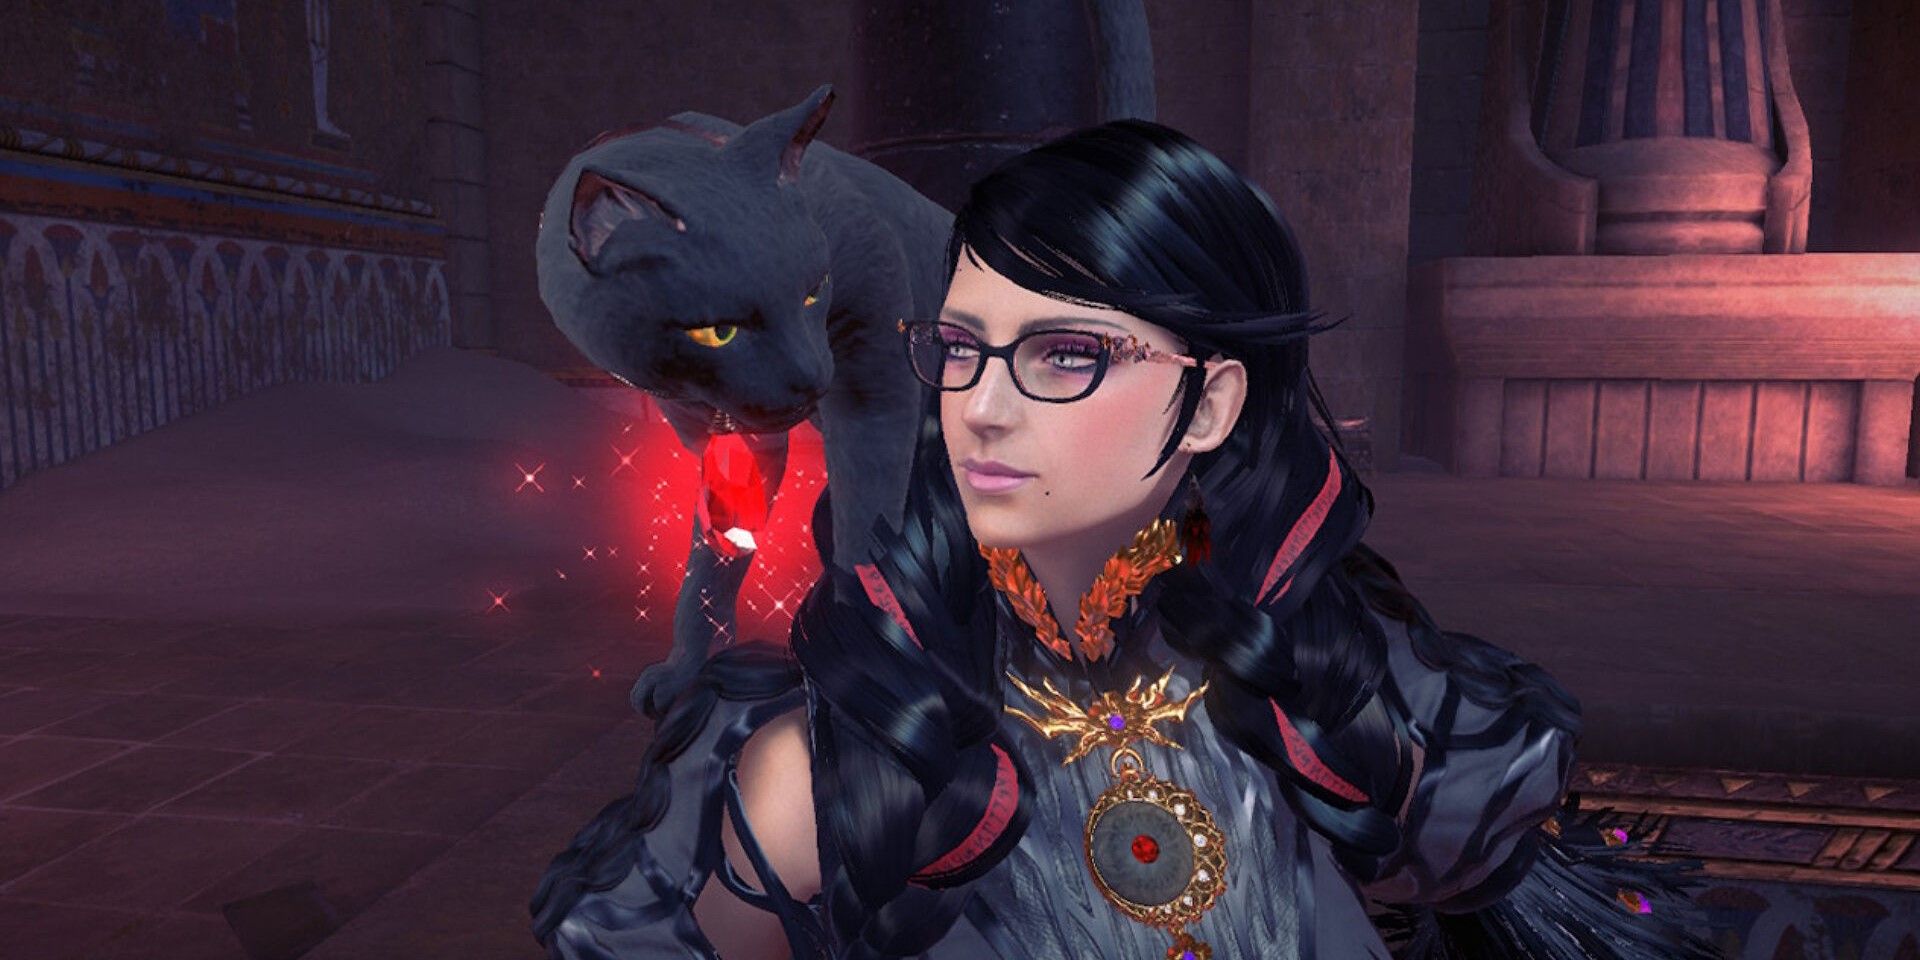 Bayonetta 3's Bayonetta with an Umbran Cat on her shoulder, giving her an Umbran Tear.